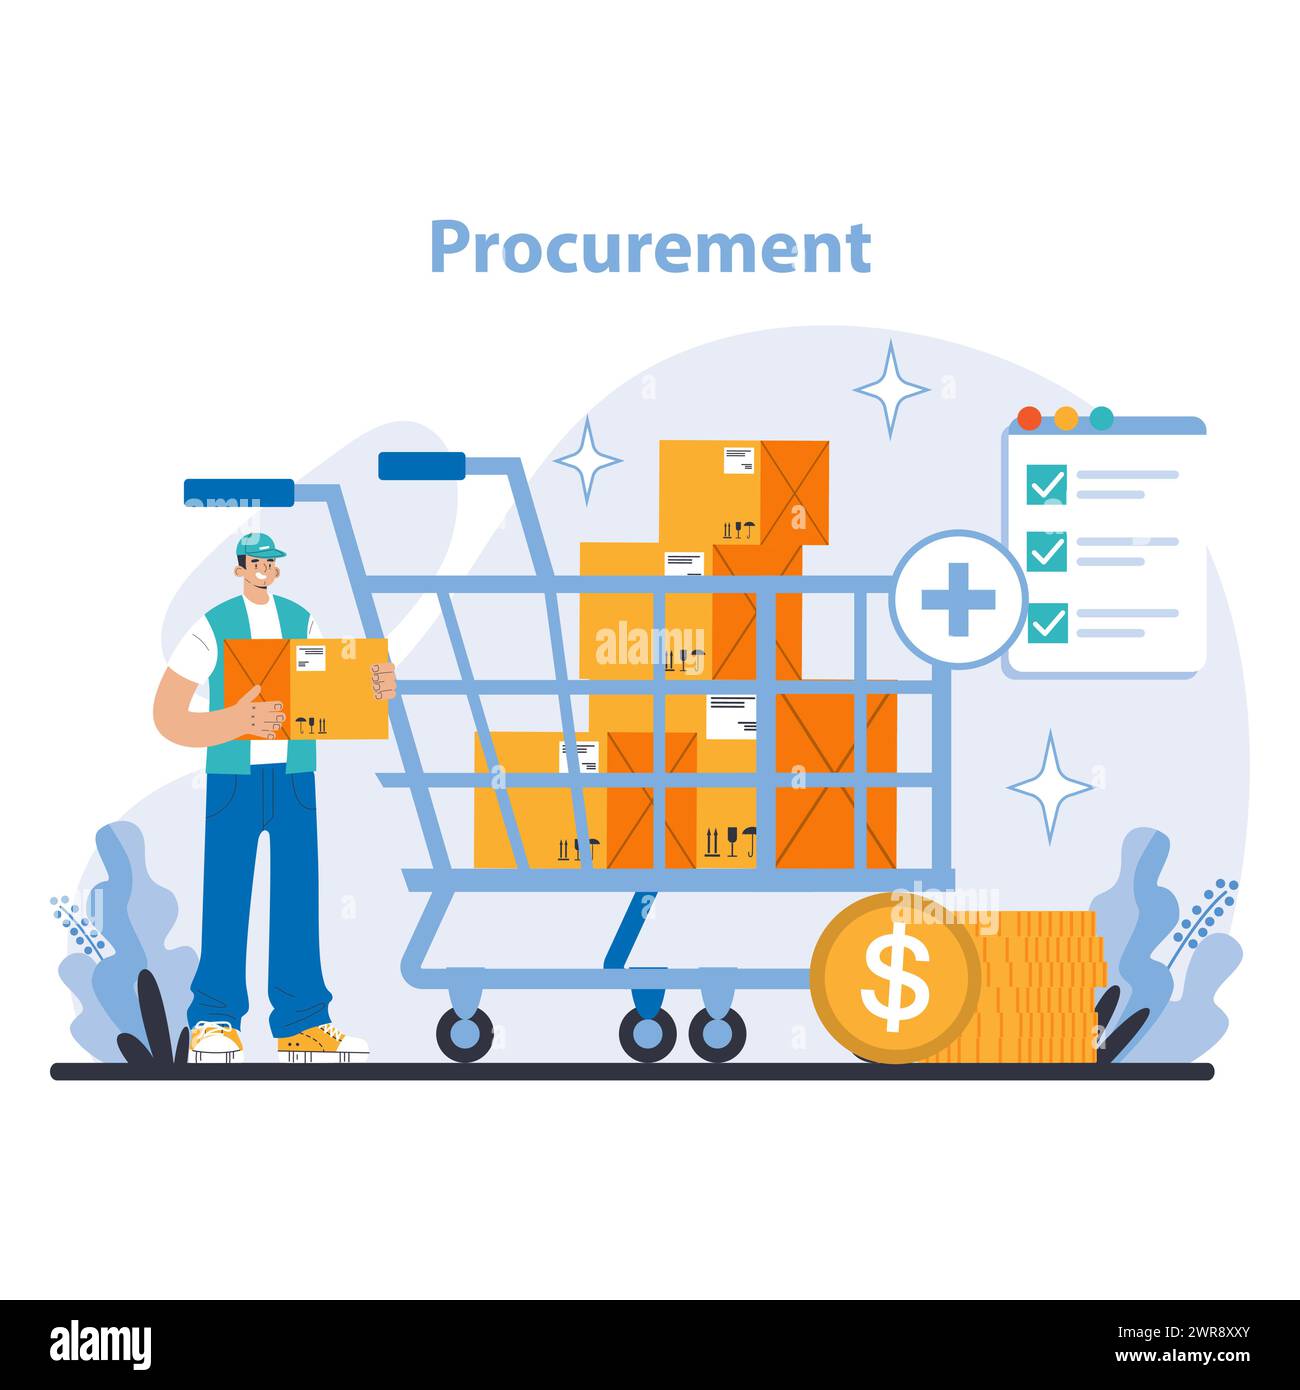 Procurement Process concept. Efficient sourcing and purchasing operations. Managing supply costs and inventory needs. Streamlining order fulfillment and vendor relations. Flat vector illustration. Stock Vector